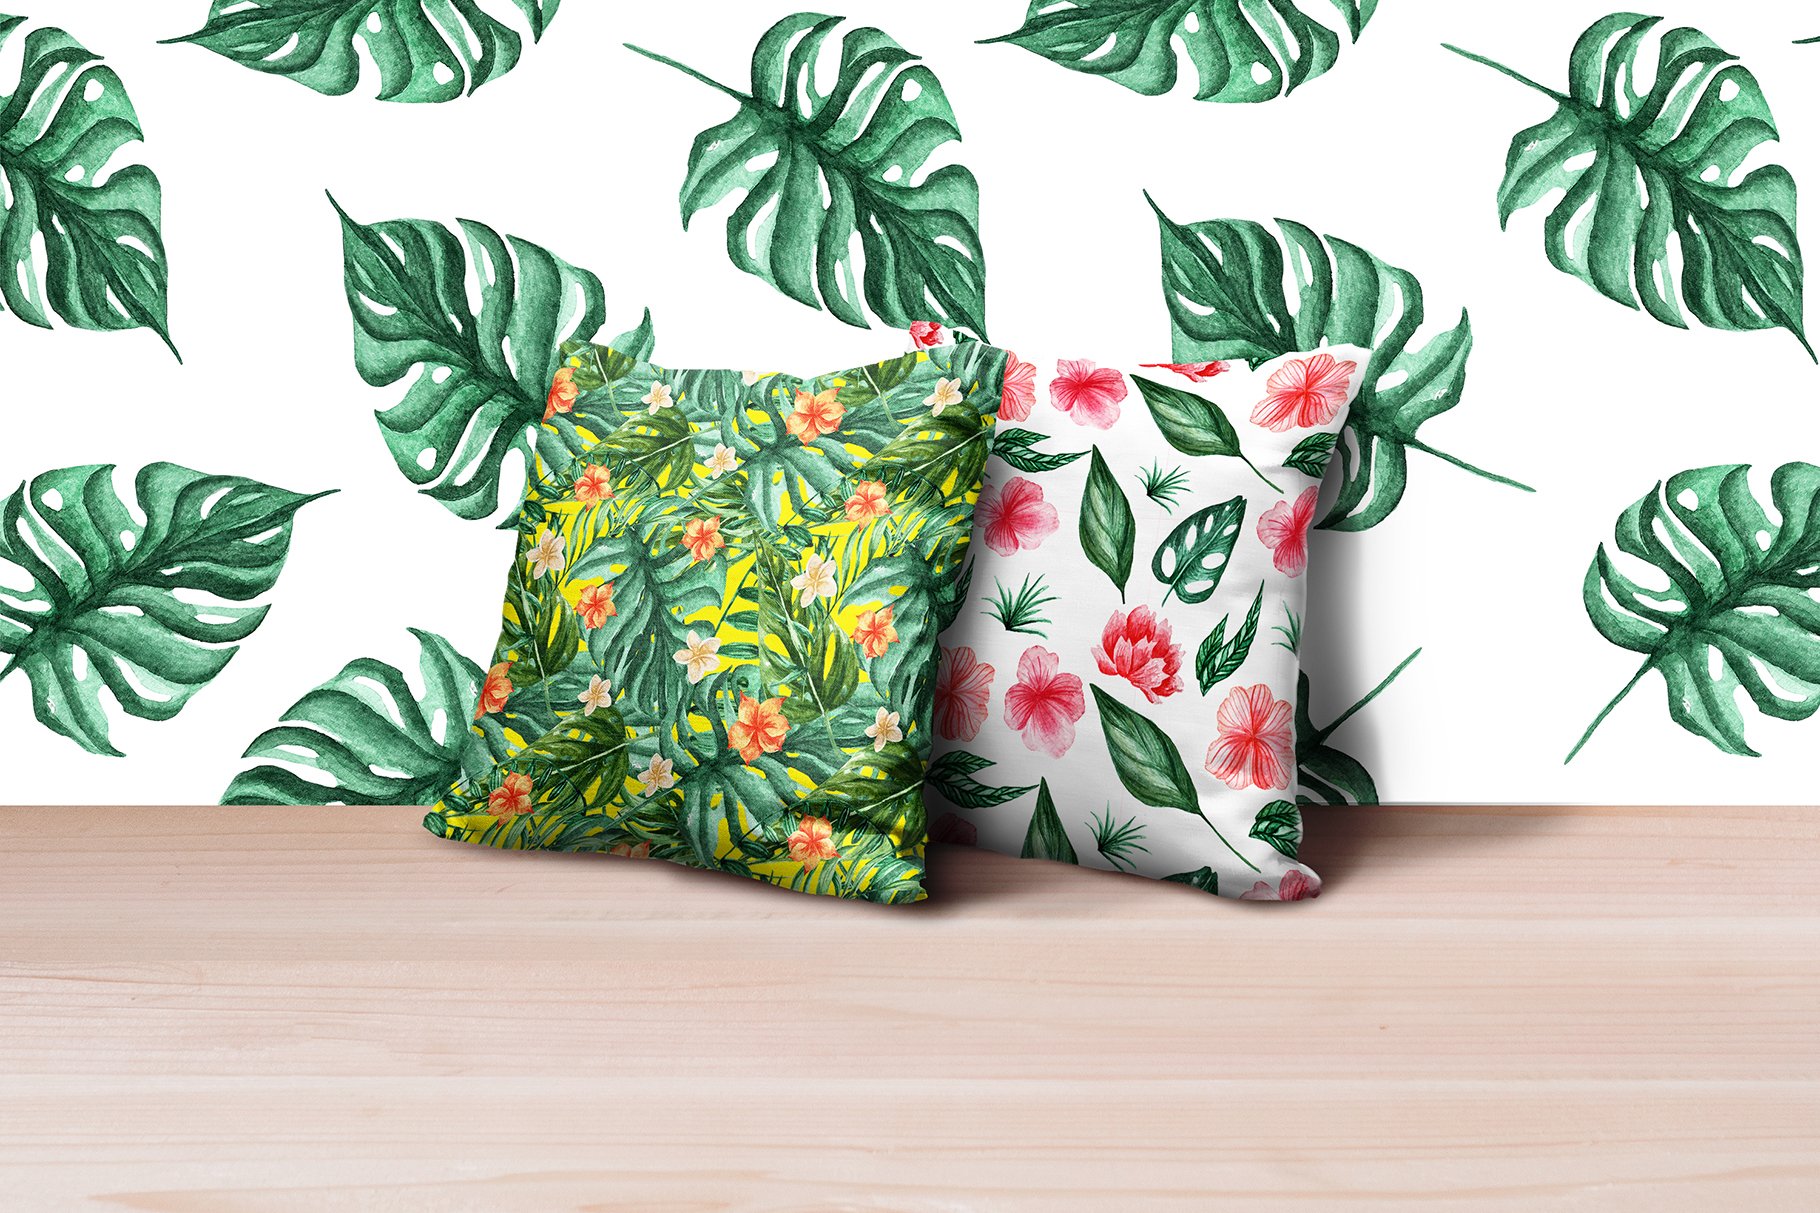 Two pillows with the leaves illustrations.